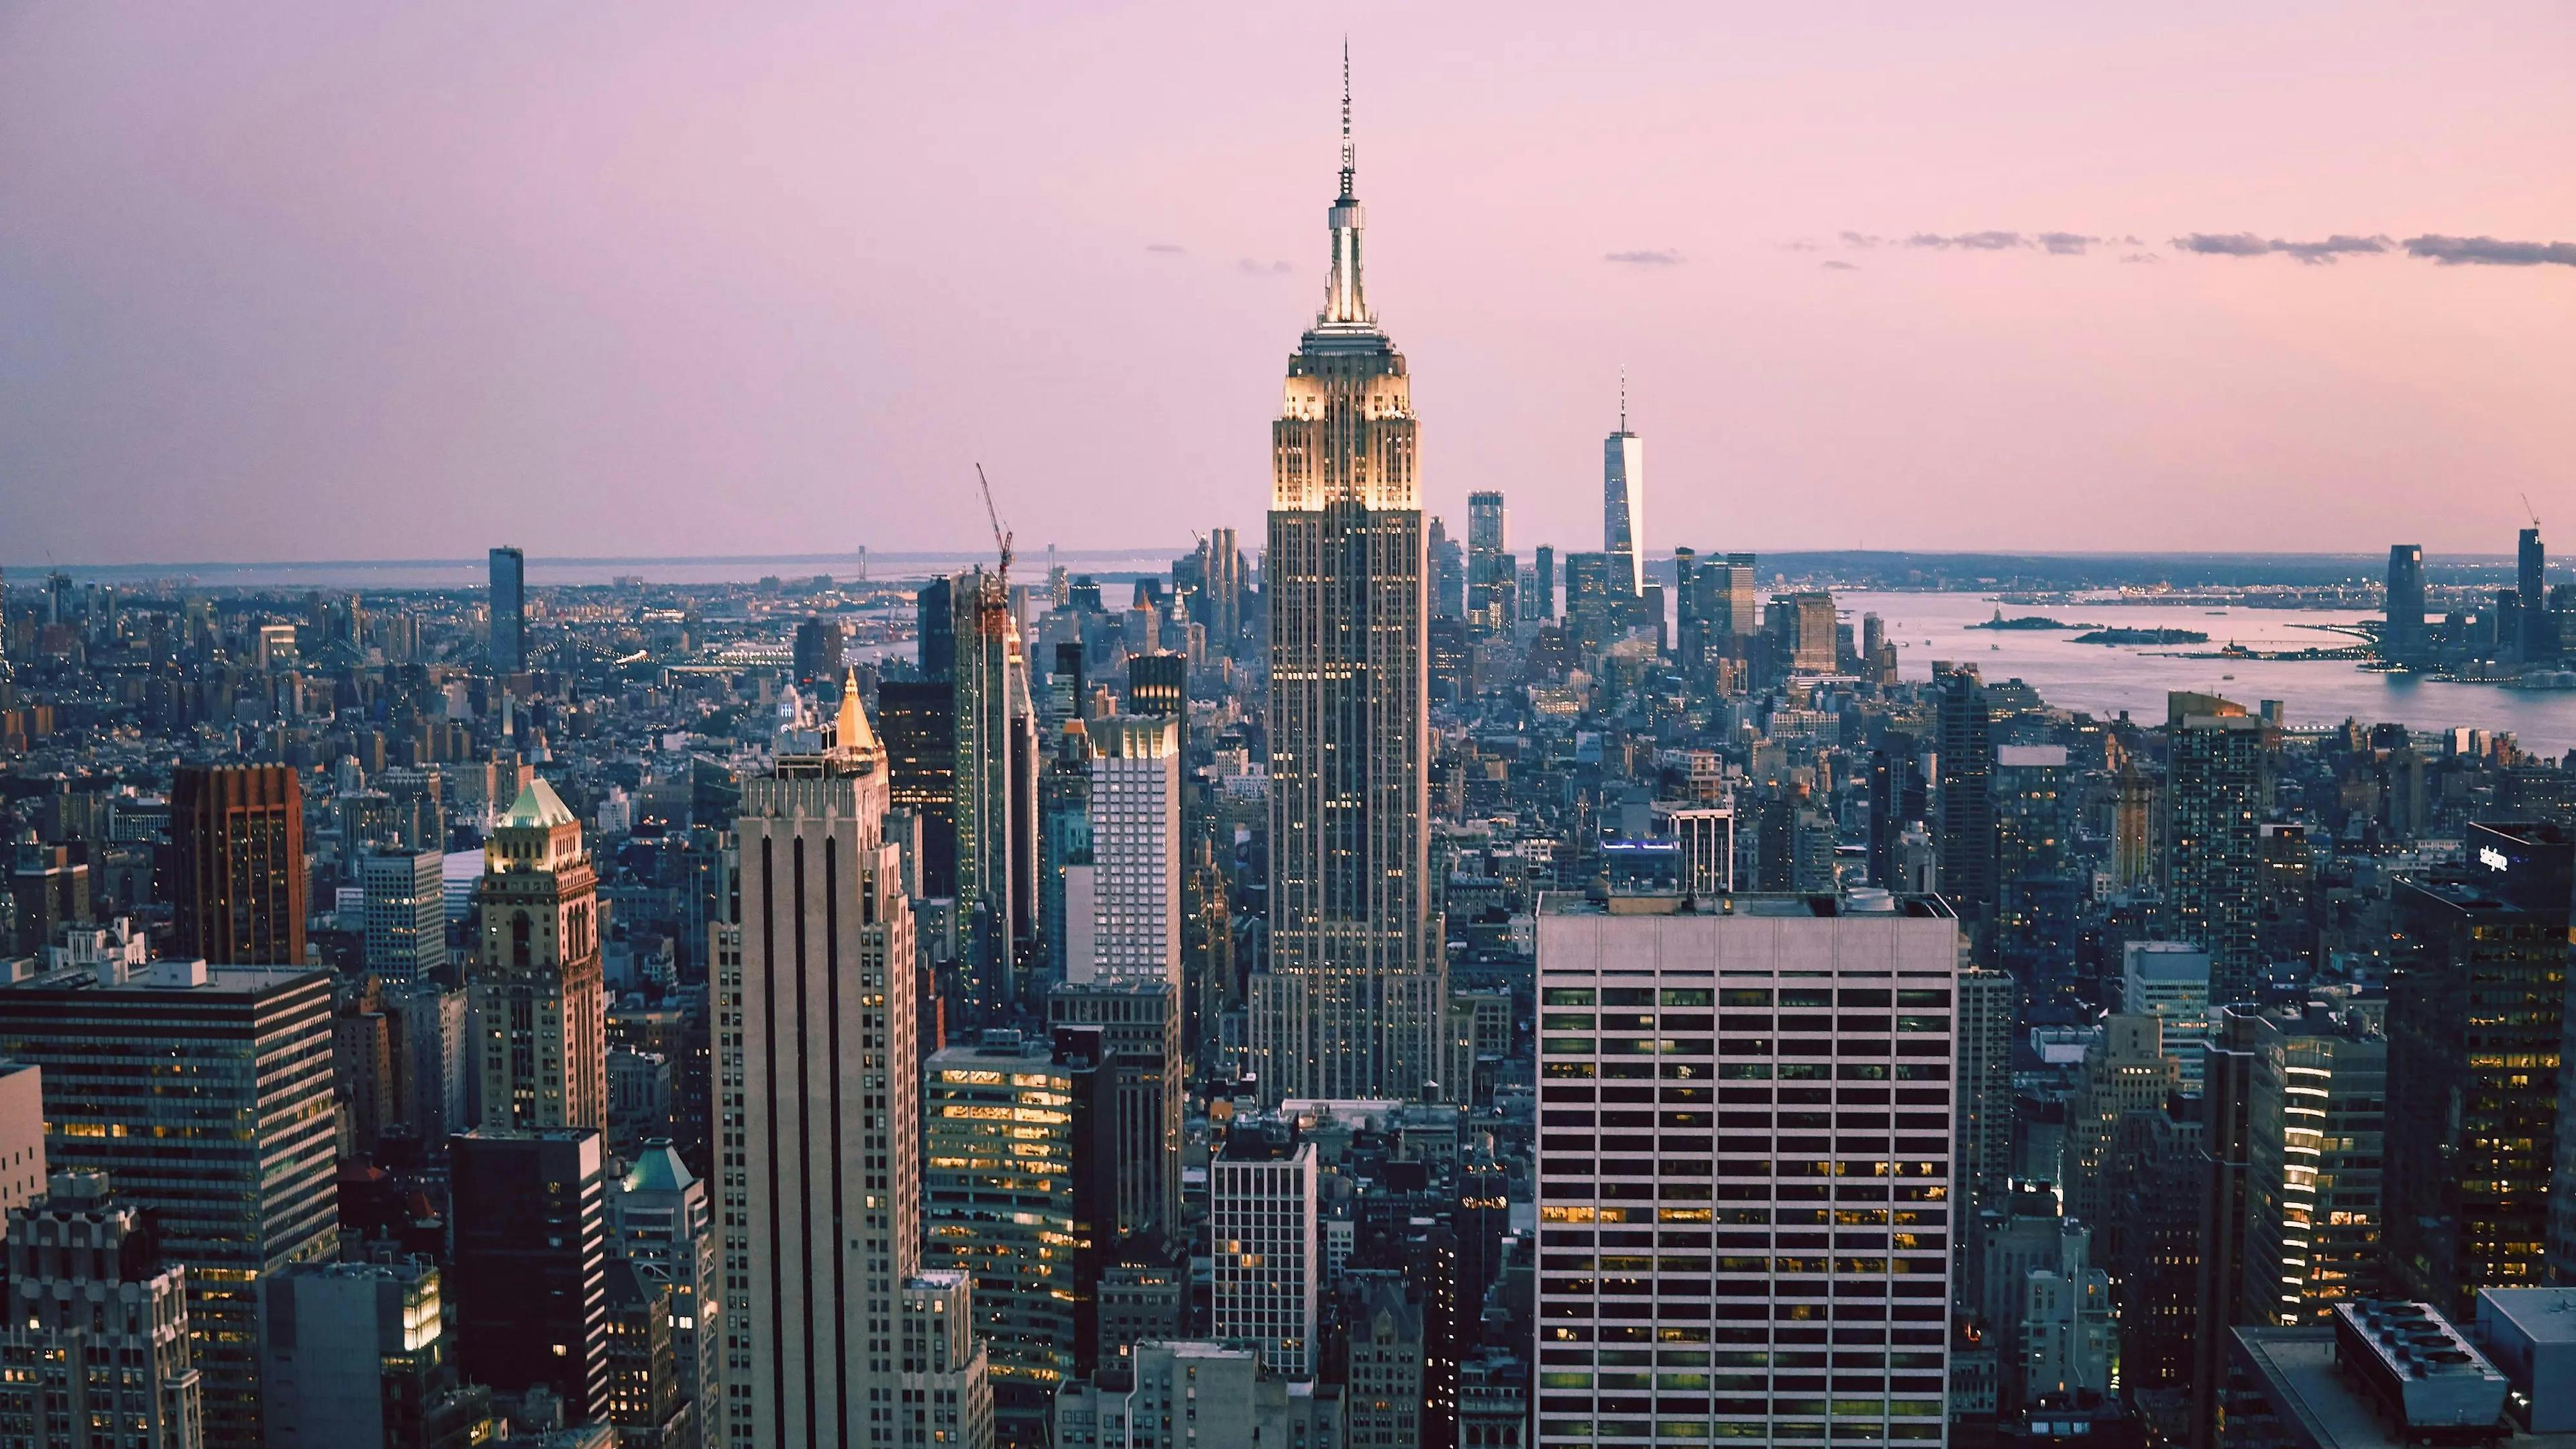 A captivating view of the New York City skyline at dusk, showcasing the iconic Empire State Building, sets the scene for the unparalleled dining experiences available through Booked, the leading restaurant reservation marketplace in New York.